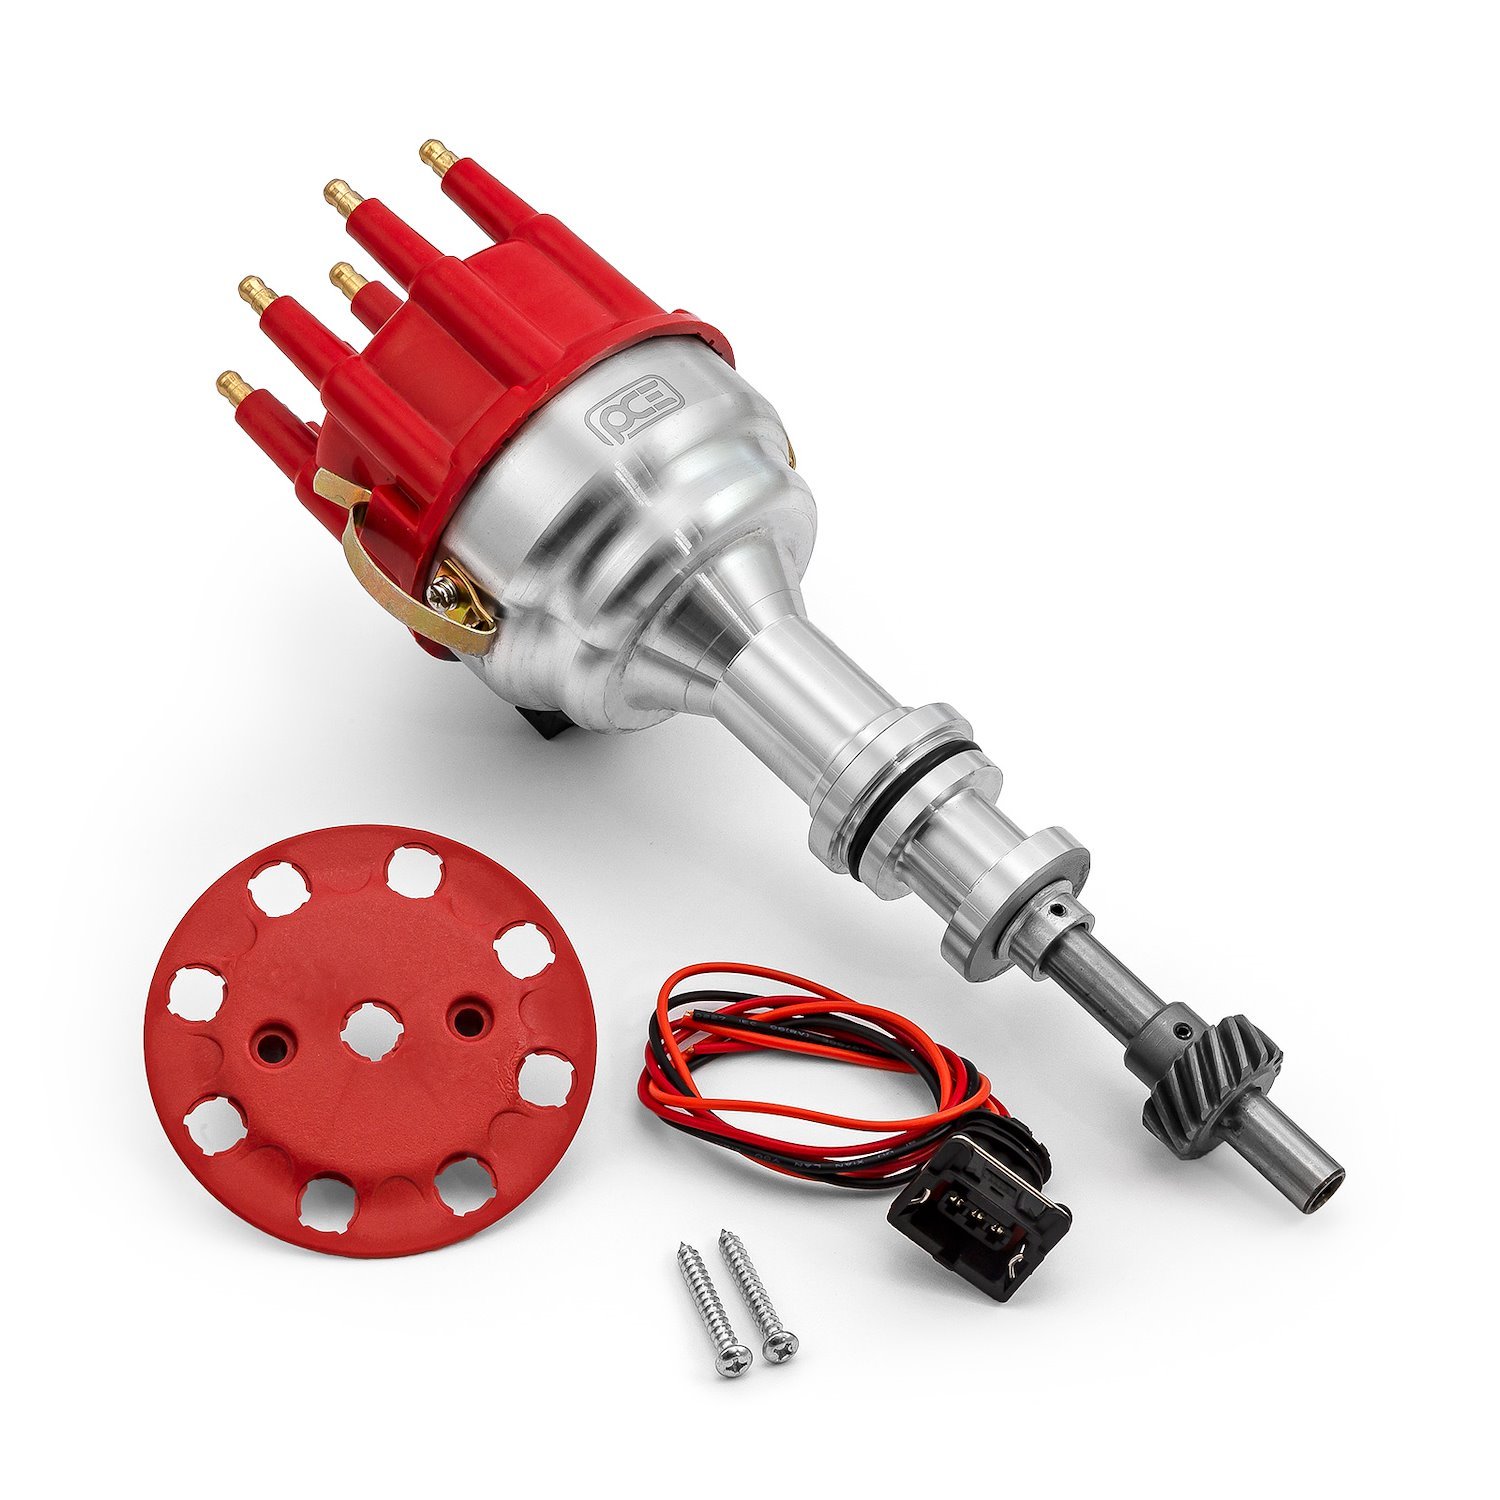 8020-Series Pro-Billet Ready-to-Run Distributor Ford 351W [Red Cap]